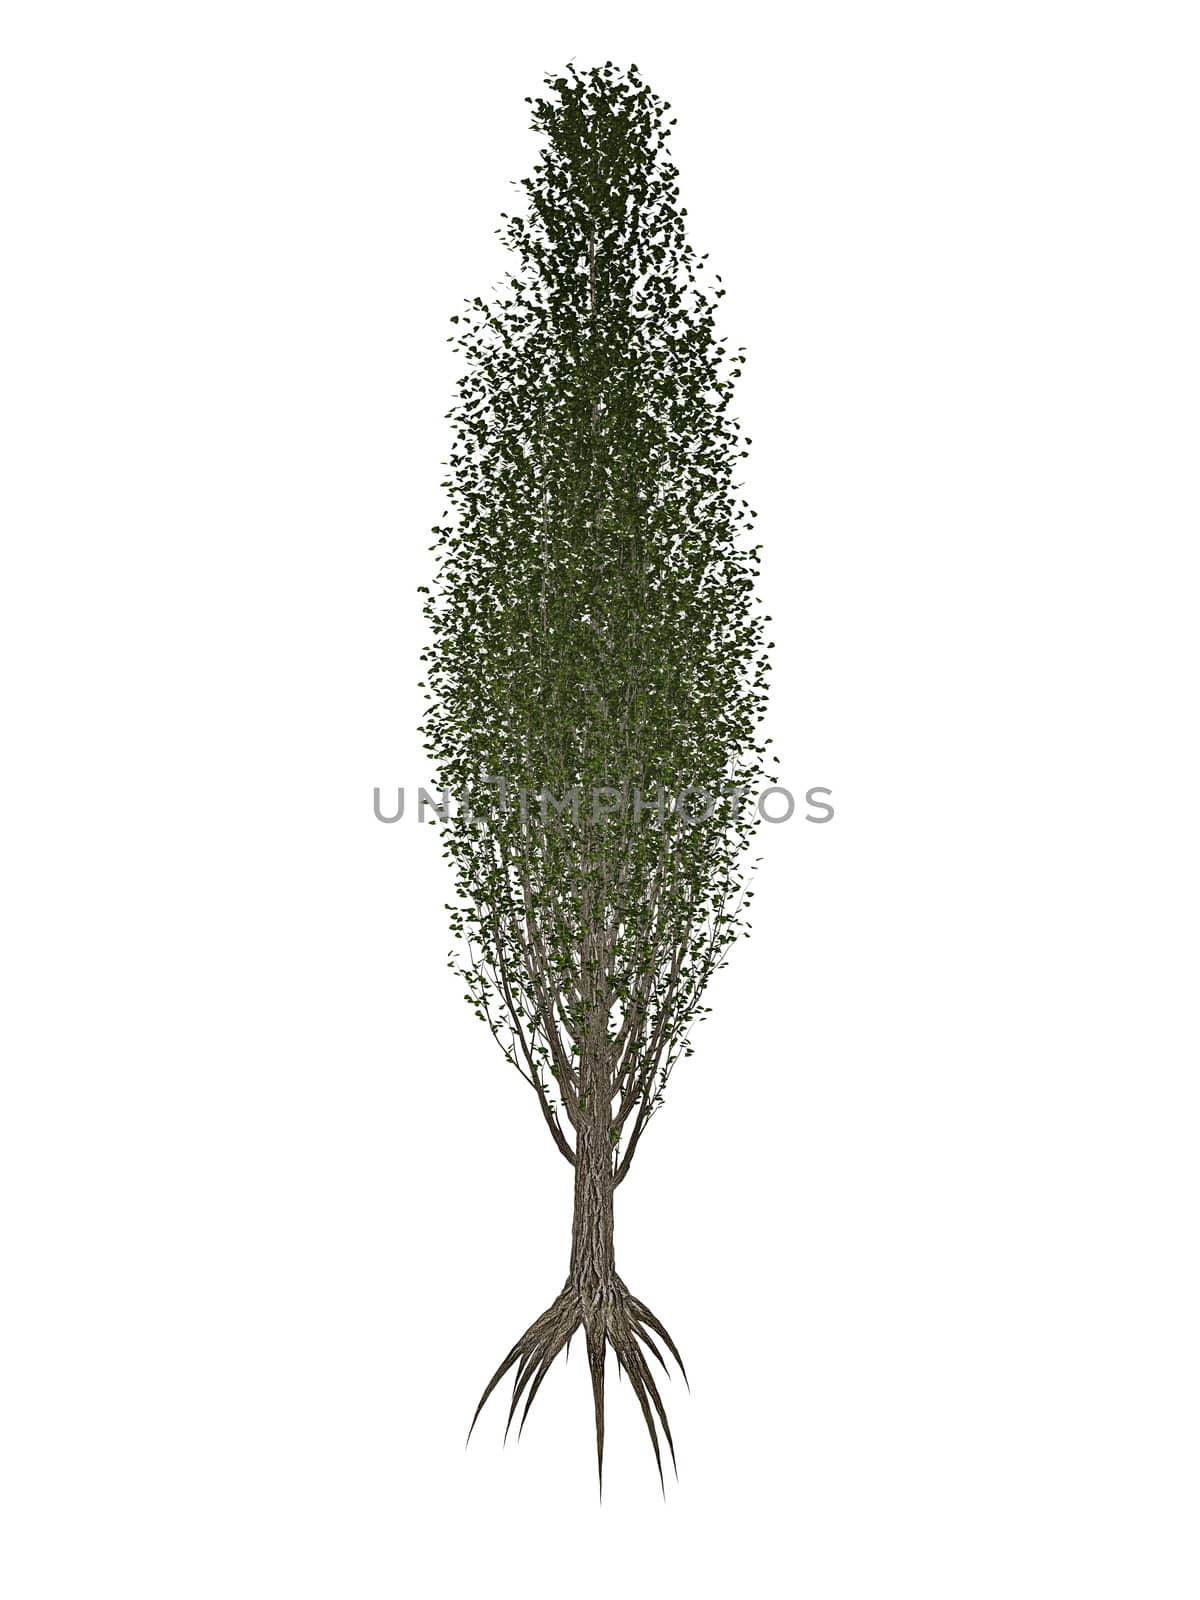 Lombardy or black poplar, populus nigra tree isolated in white background - 3D render